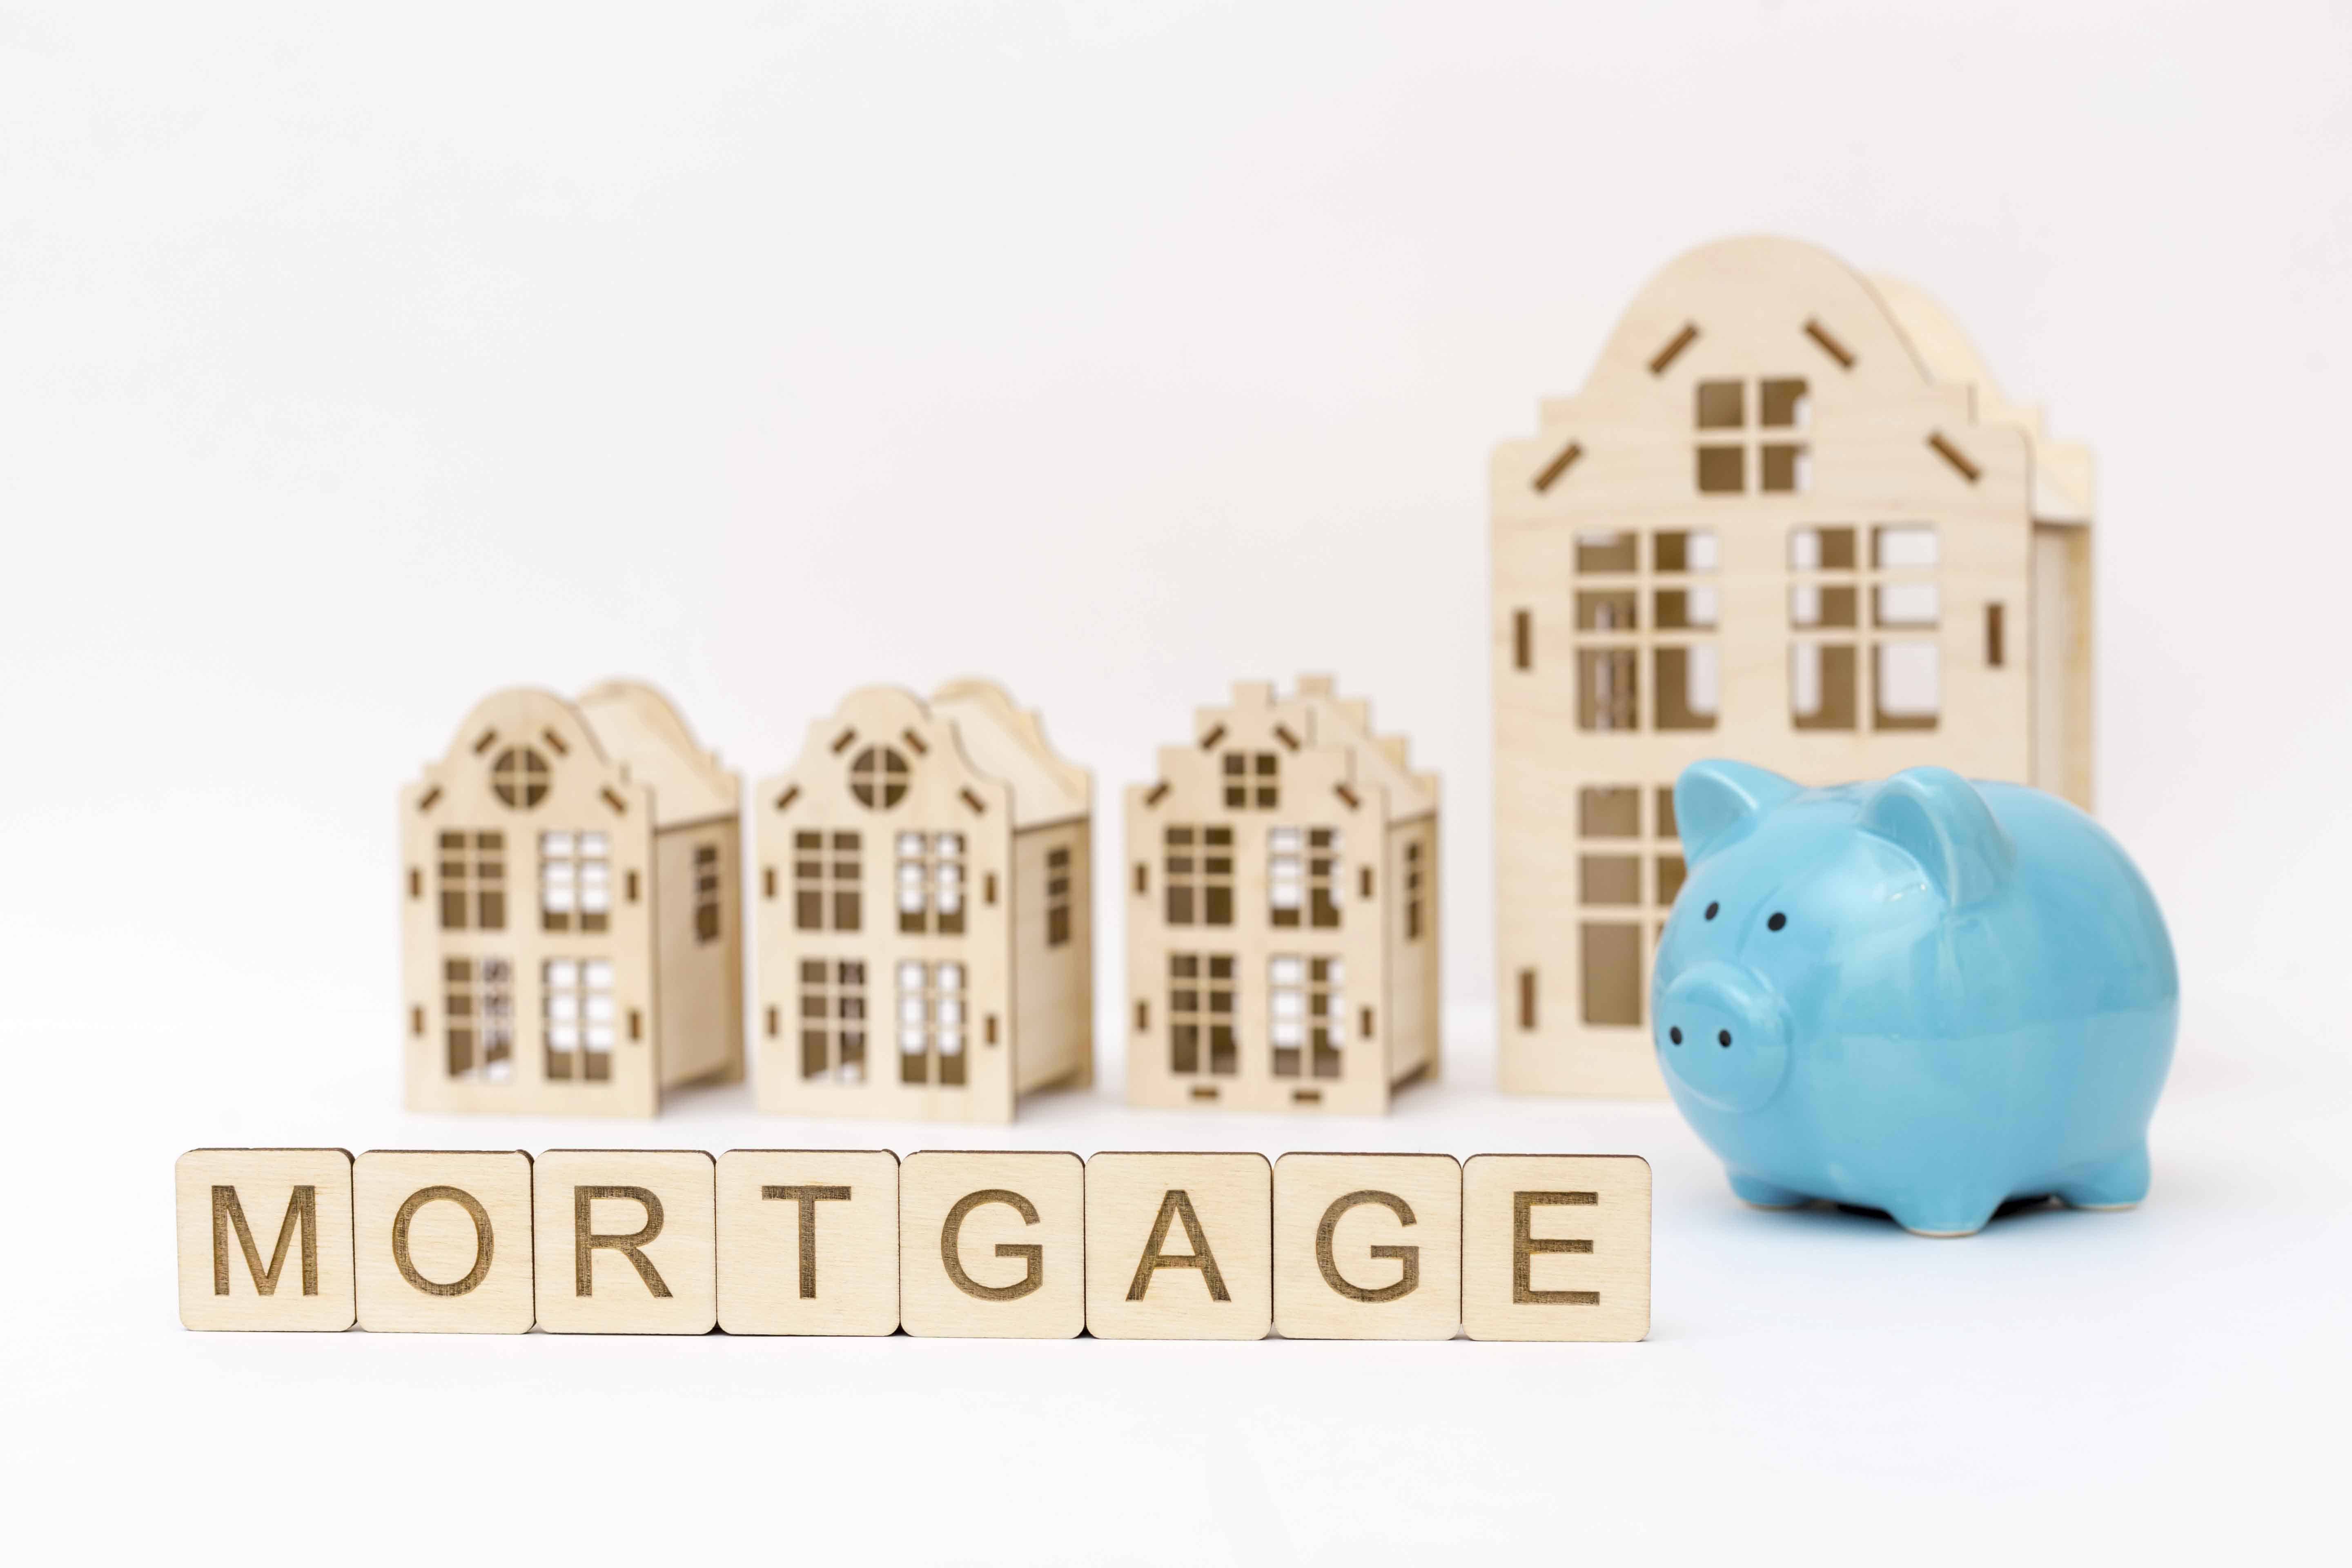 Blue piggy bank and wooden sign "mortgage" house model 